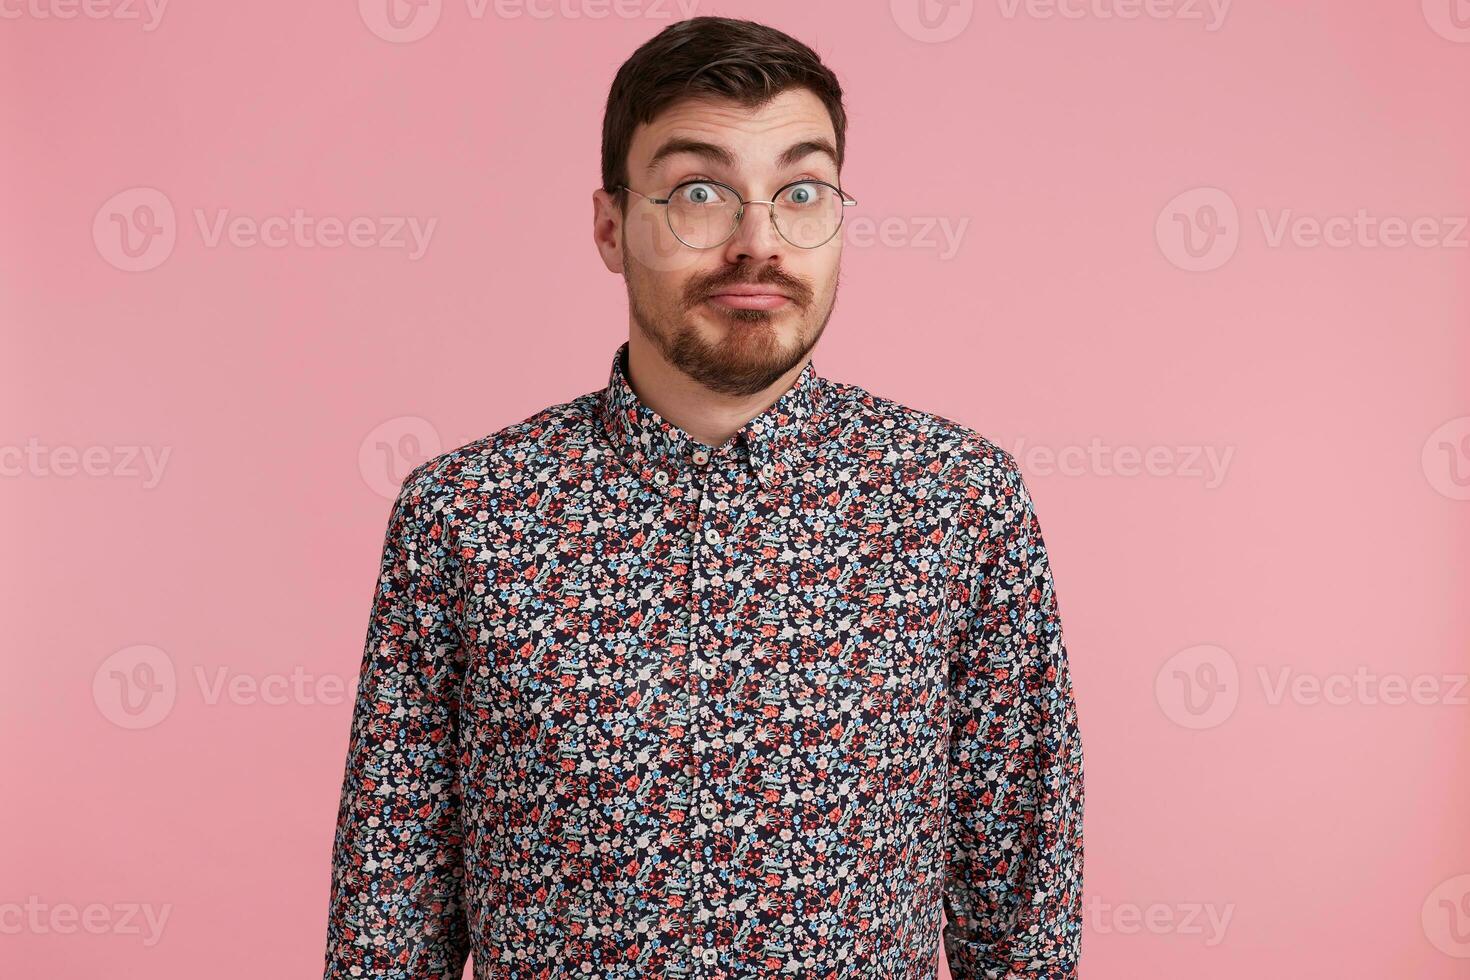 Unsure uncertain surprised man stares through spectacles wearing colorful shirt shrug shoulders in uncertainty, over pink background photo